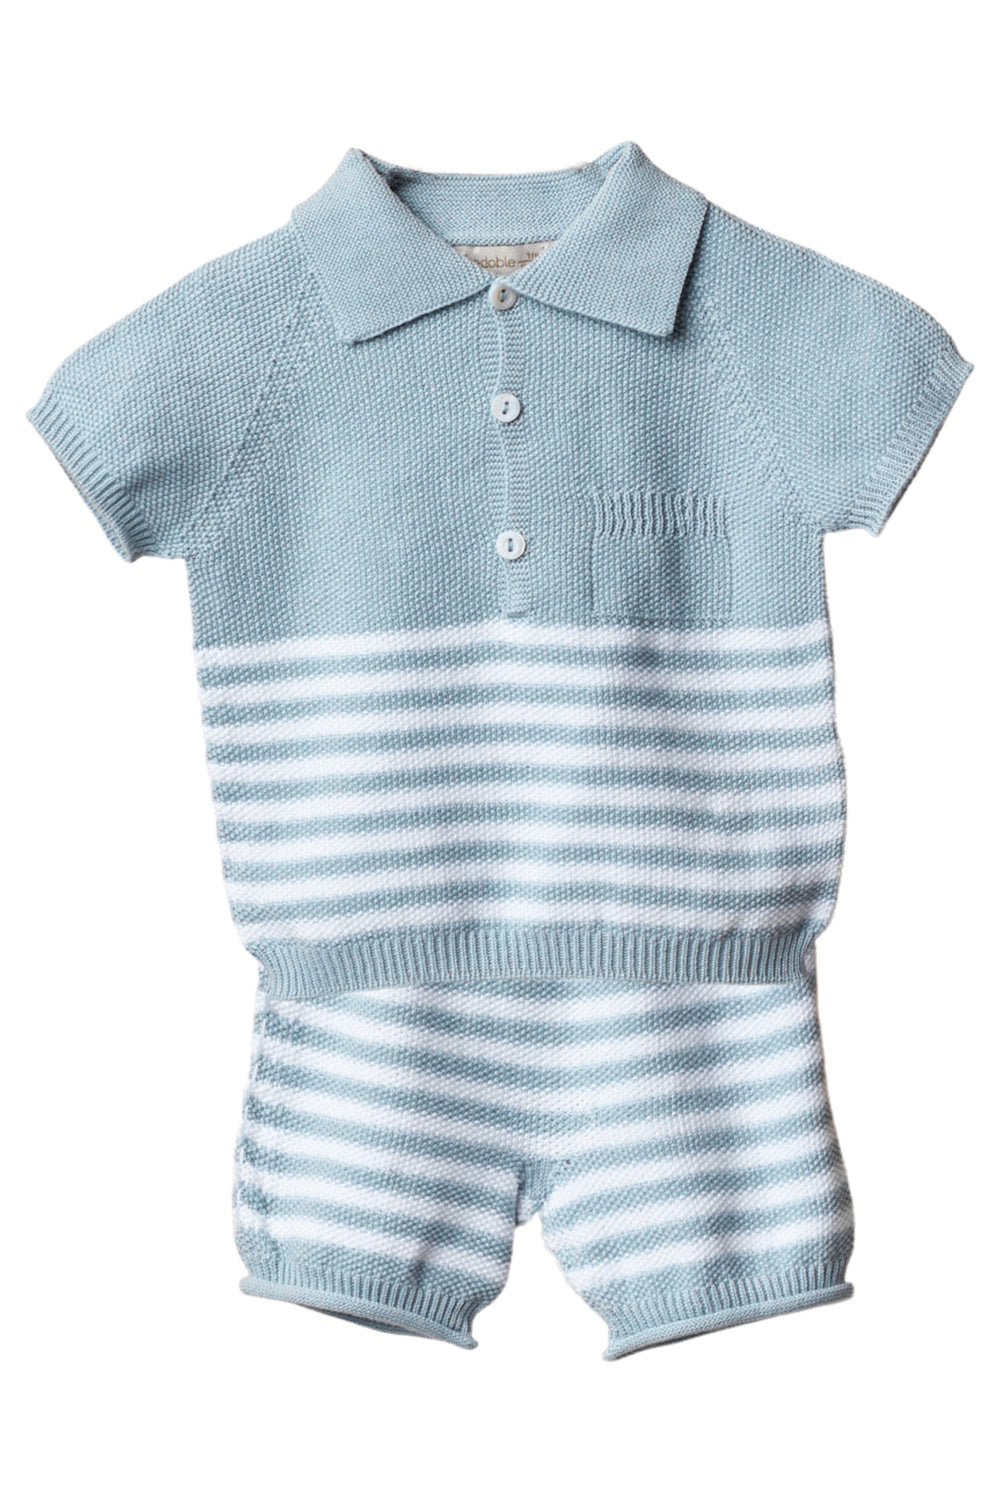 Wedoble "Zachary" Soft Blue Striped Knitted Polo Shirt & Shorts | Millie and John